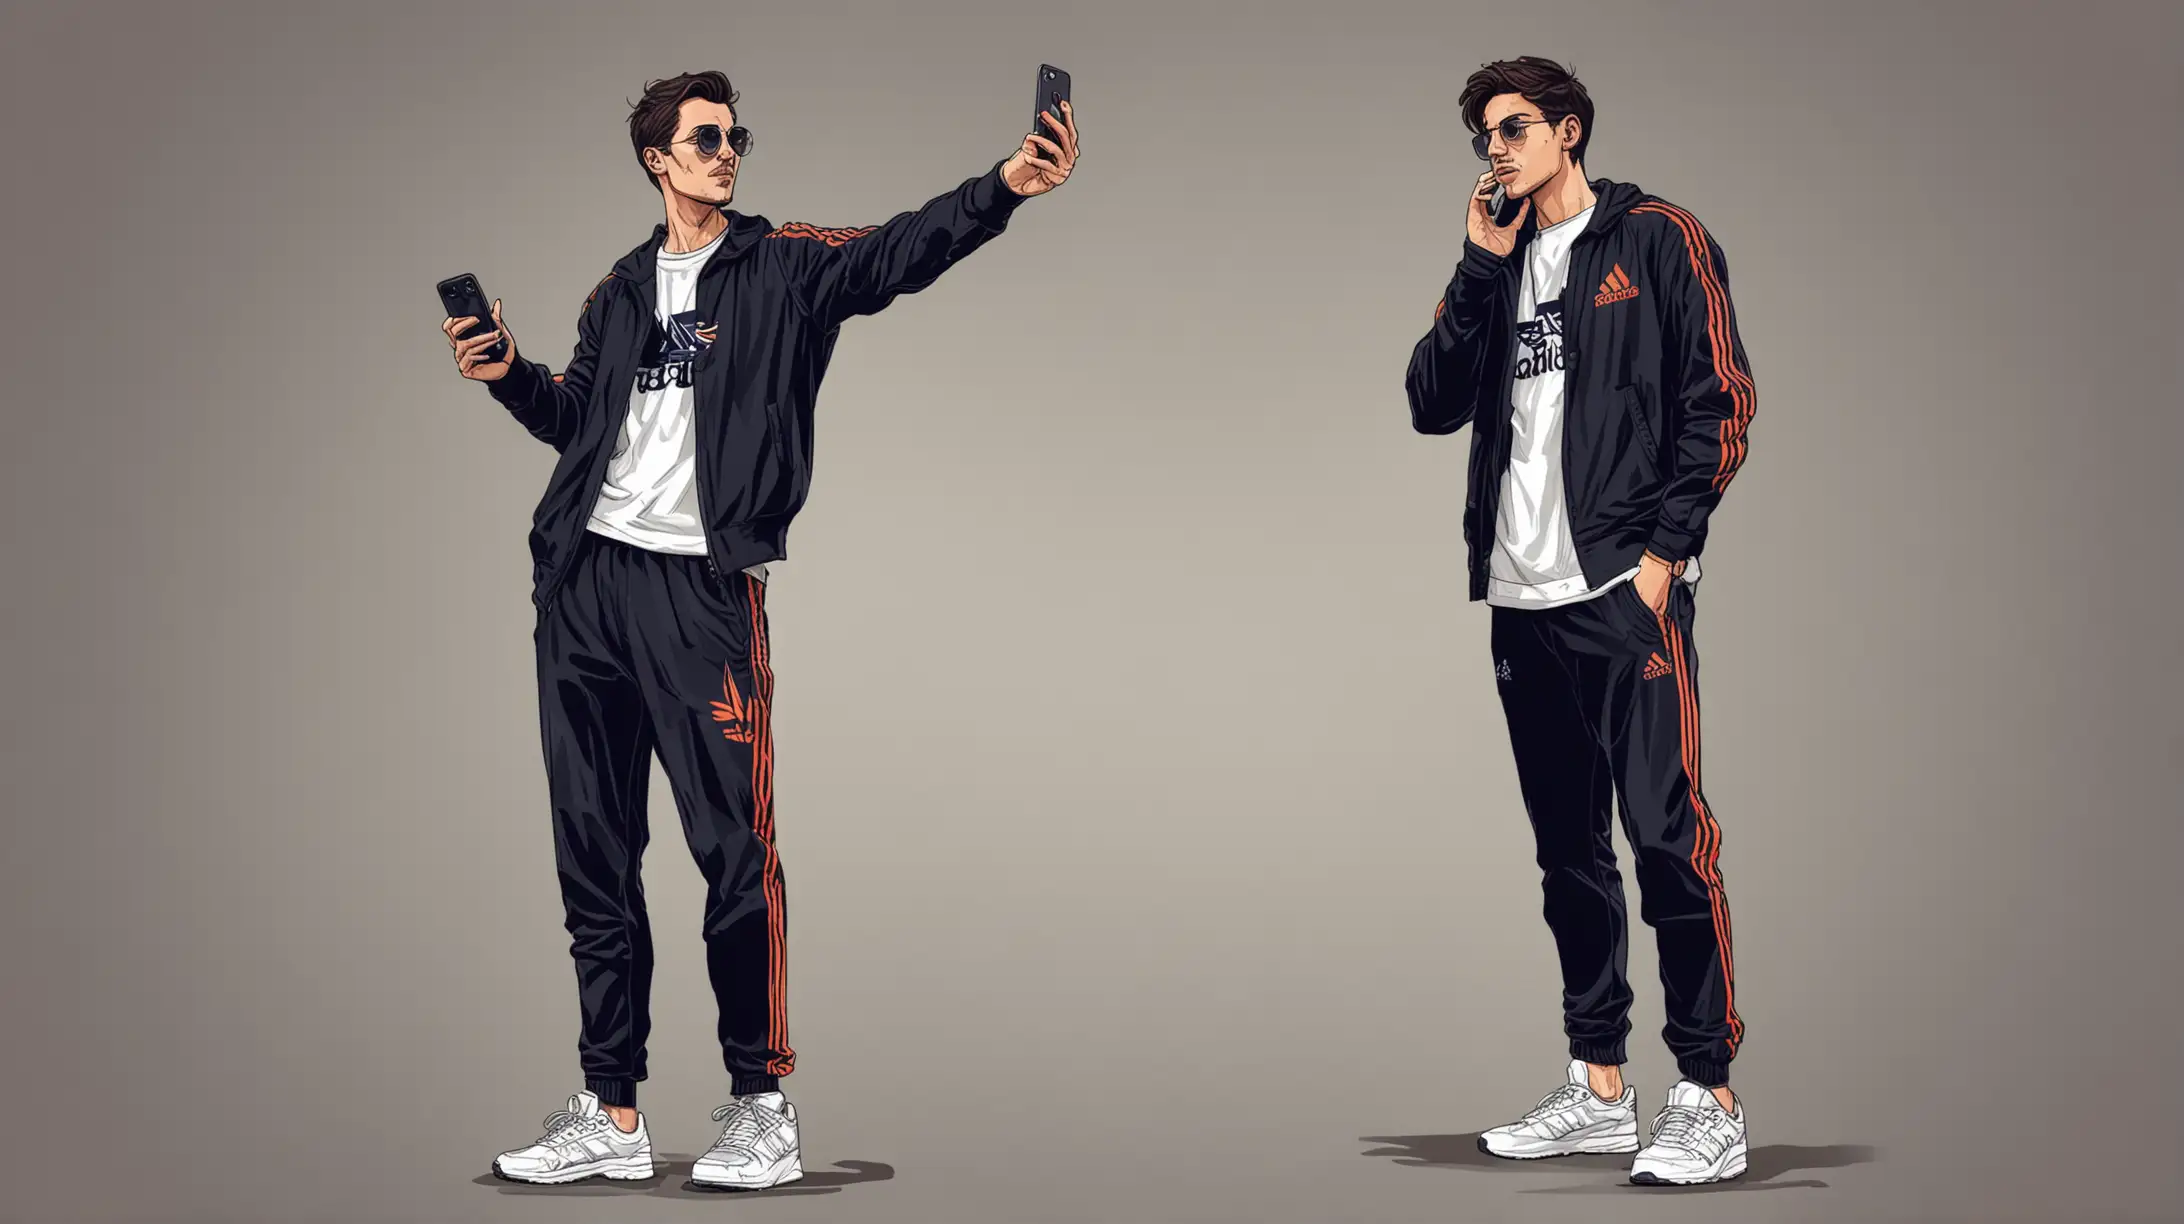 silhouette vector illustration man in loose firebird adidas track suit pant and asics sneakers
 and t-shirt taking selfie